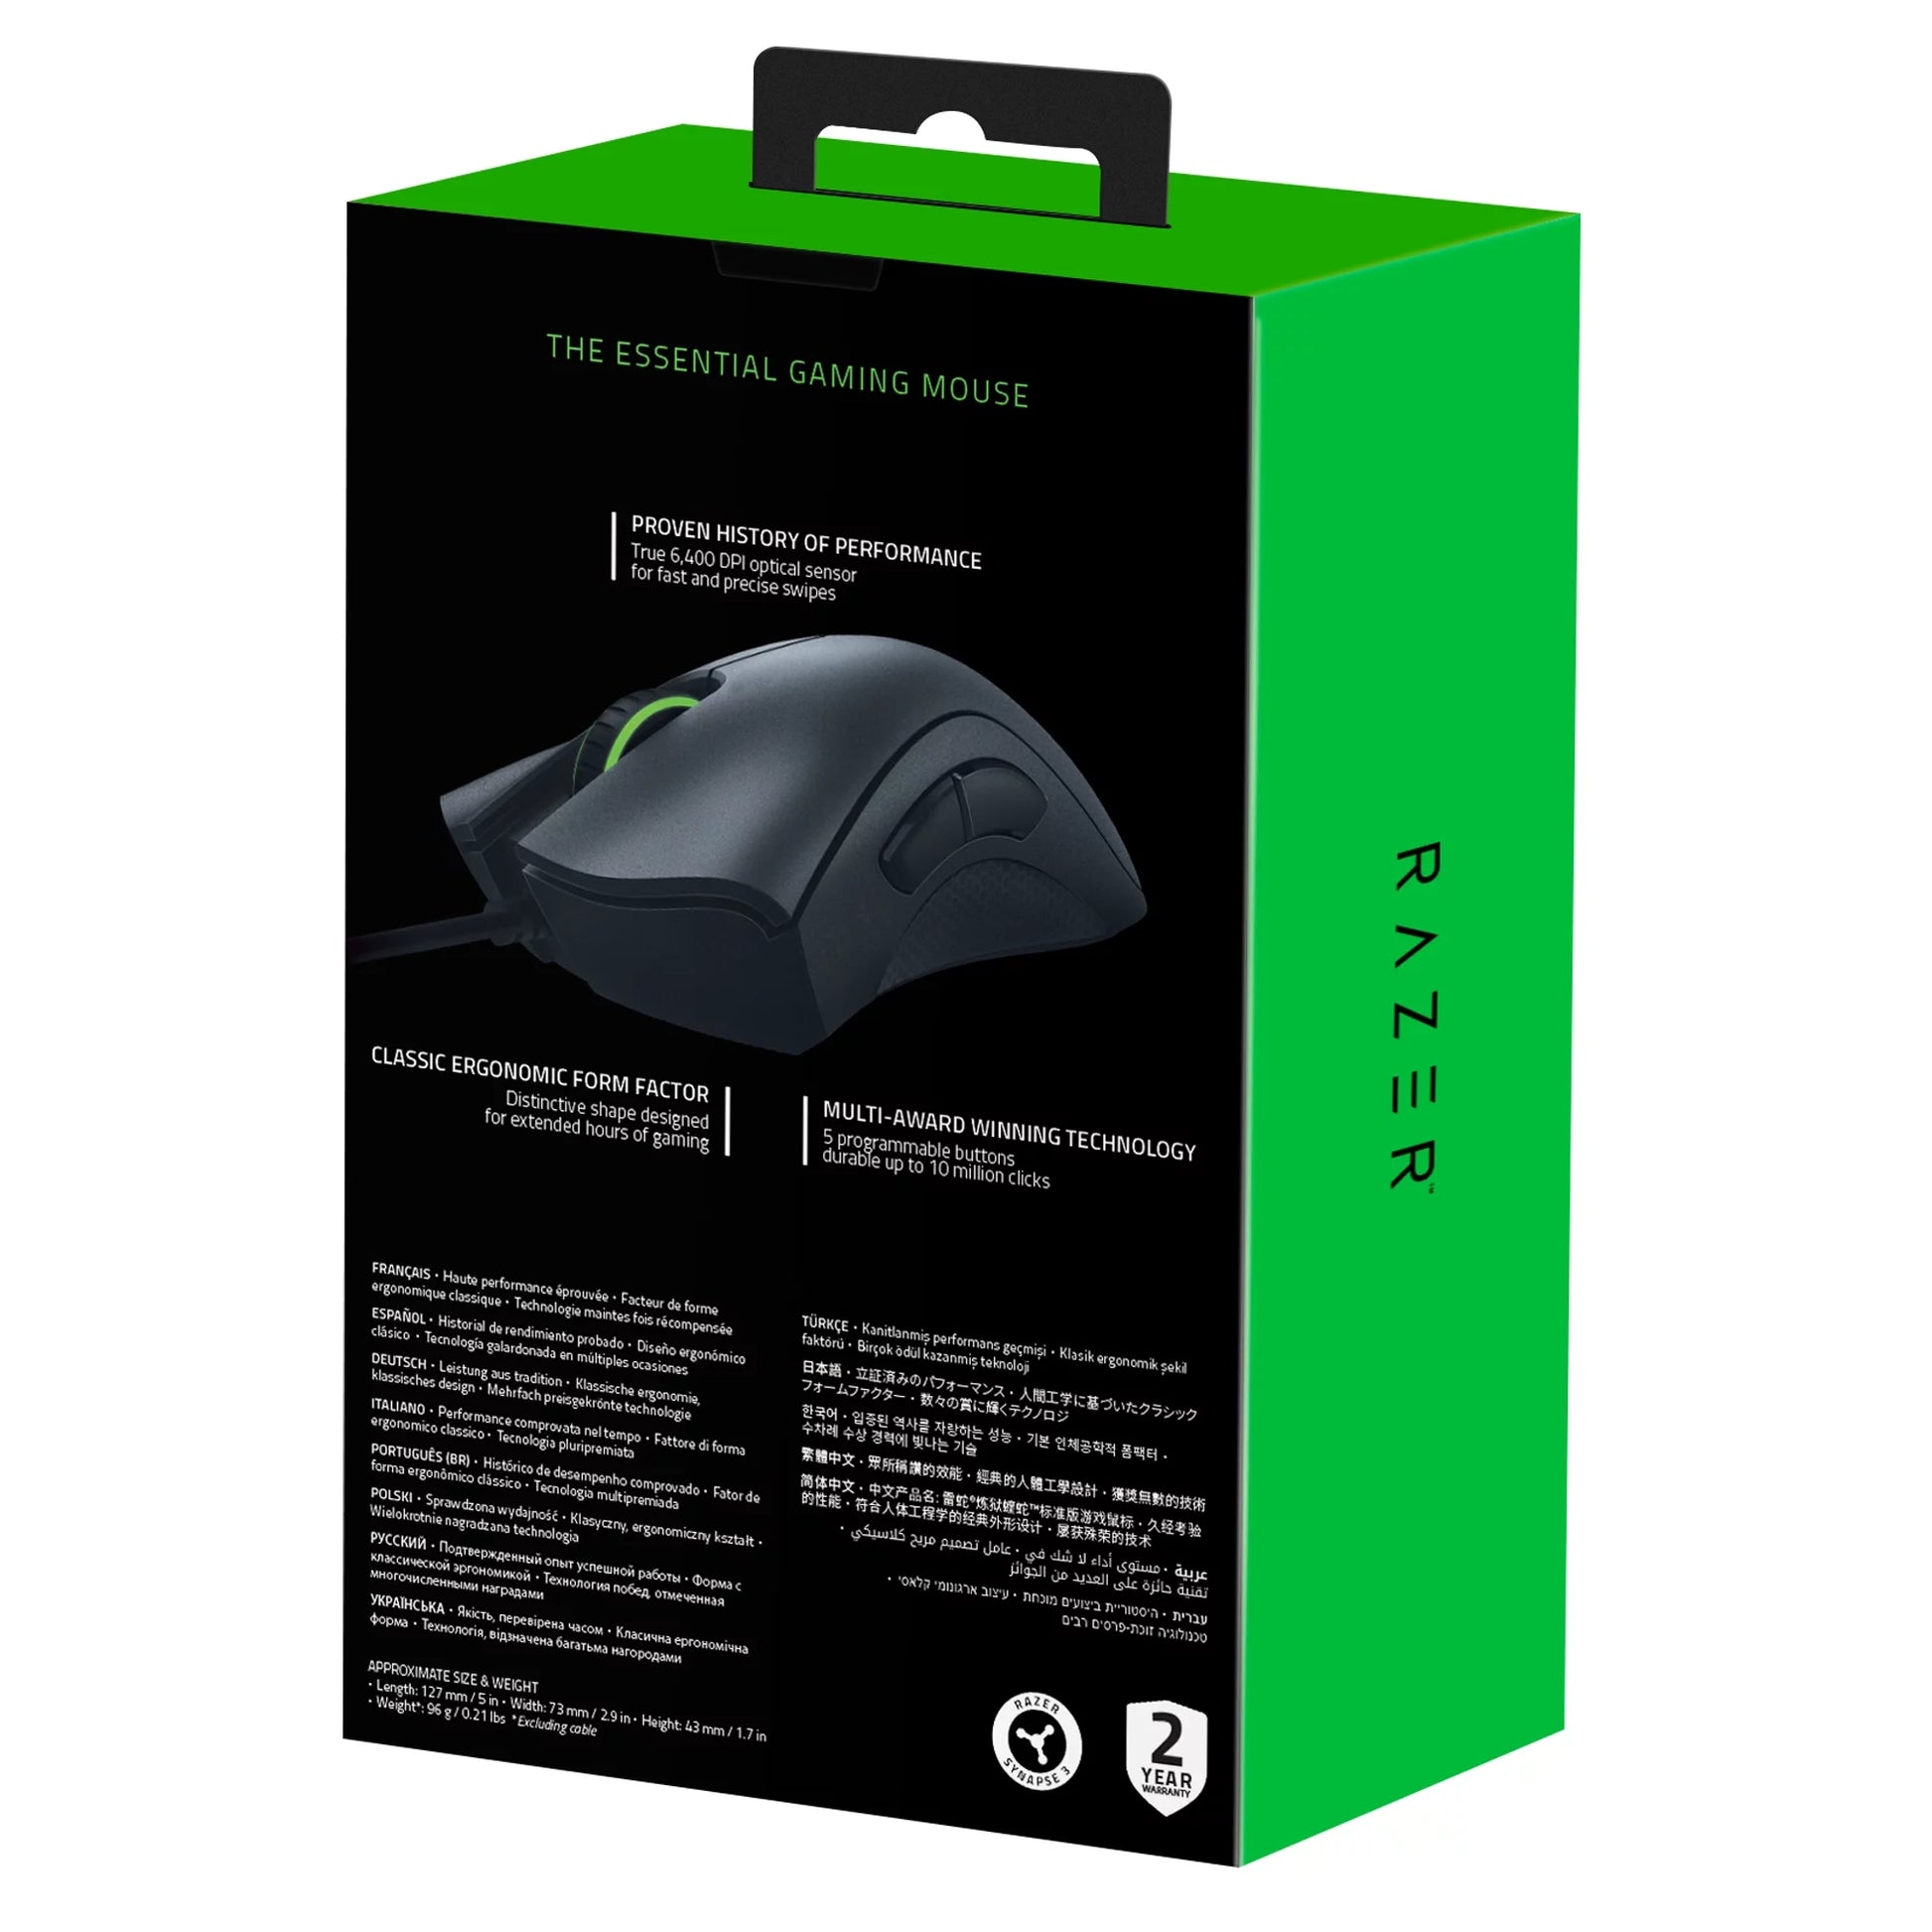 Deathadder Essential Wired Optical Gaming Mouse for PC, 5 Buttons, Black